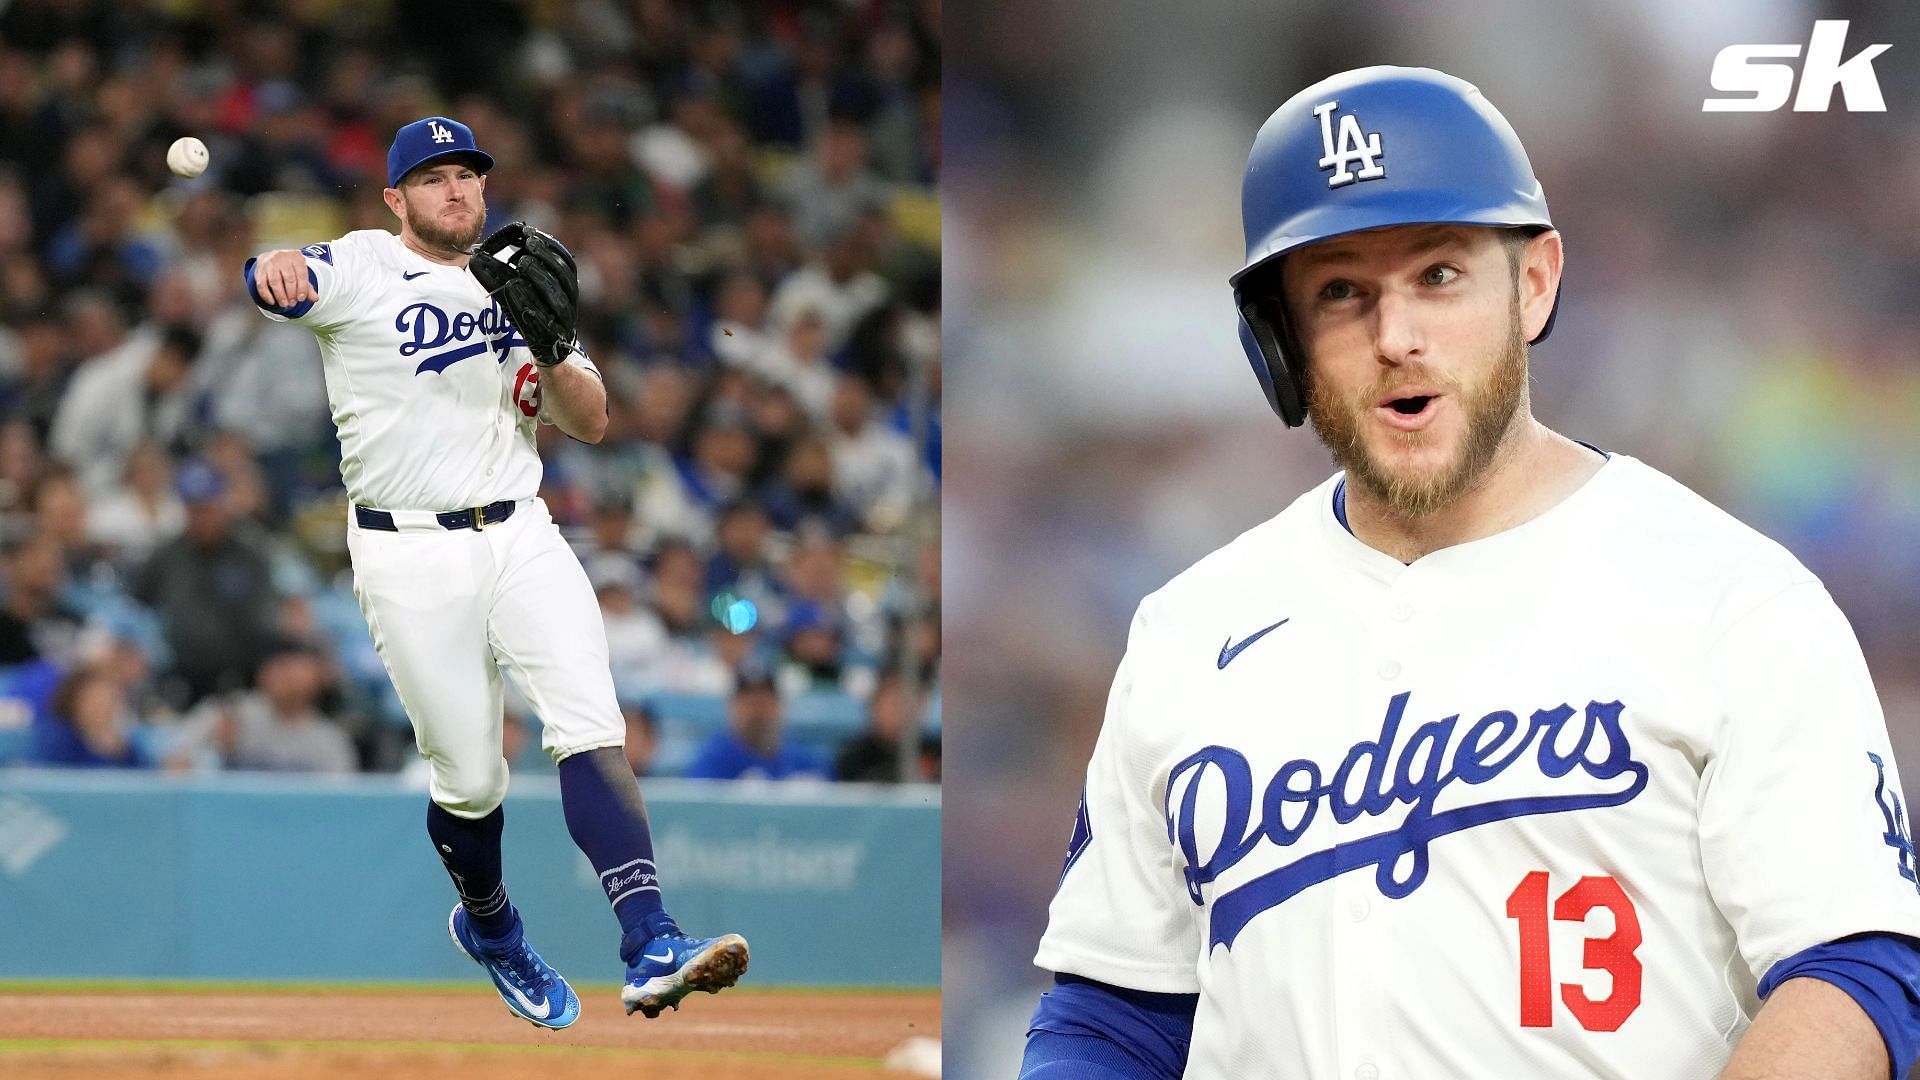 The Los Angeles Dodgers have placed star Max Muncy on the 10-day IL with oblique injury